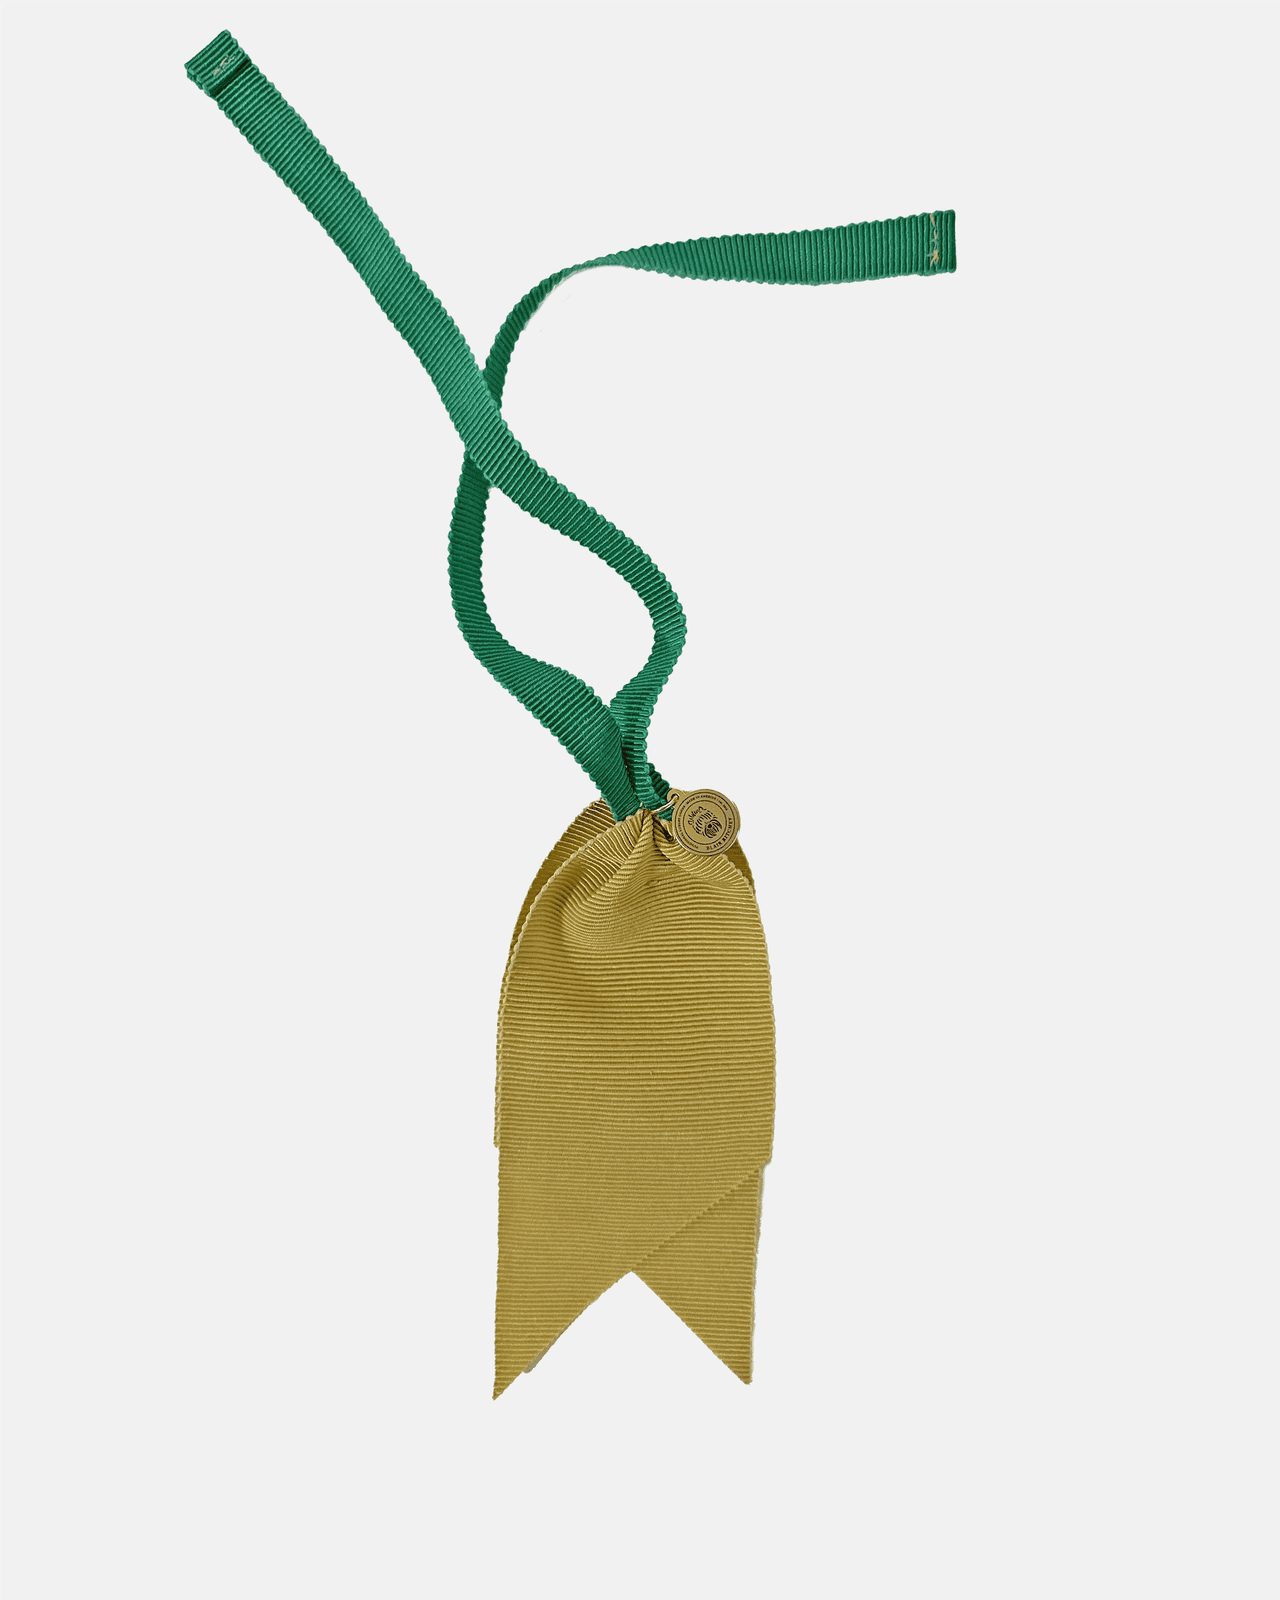 French Ribbon Tie | Muted Yellow / Kelly Green Blair Ritchey